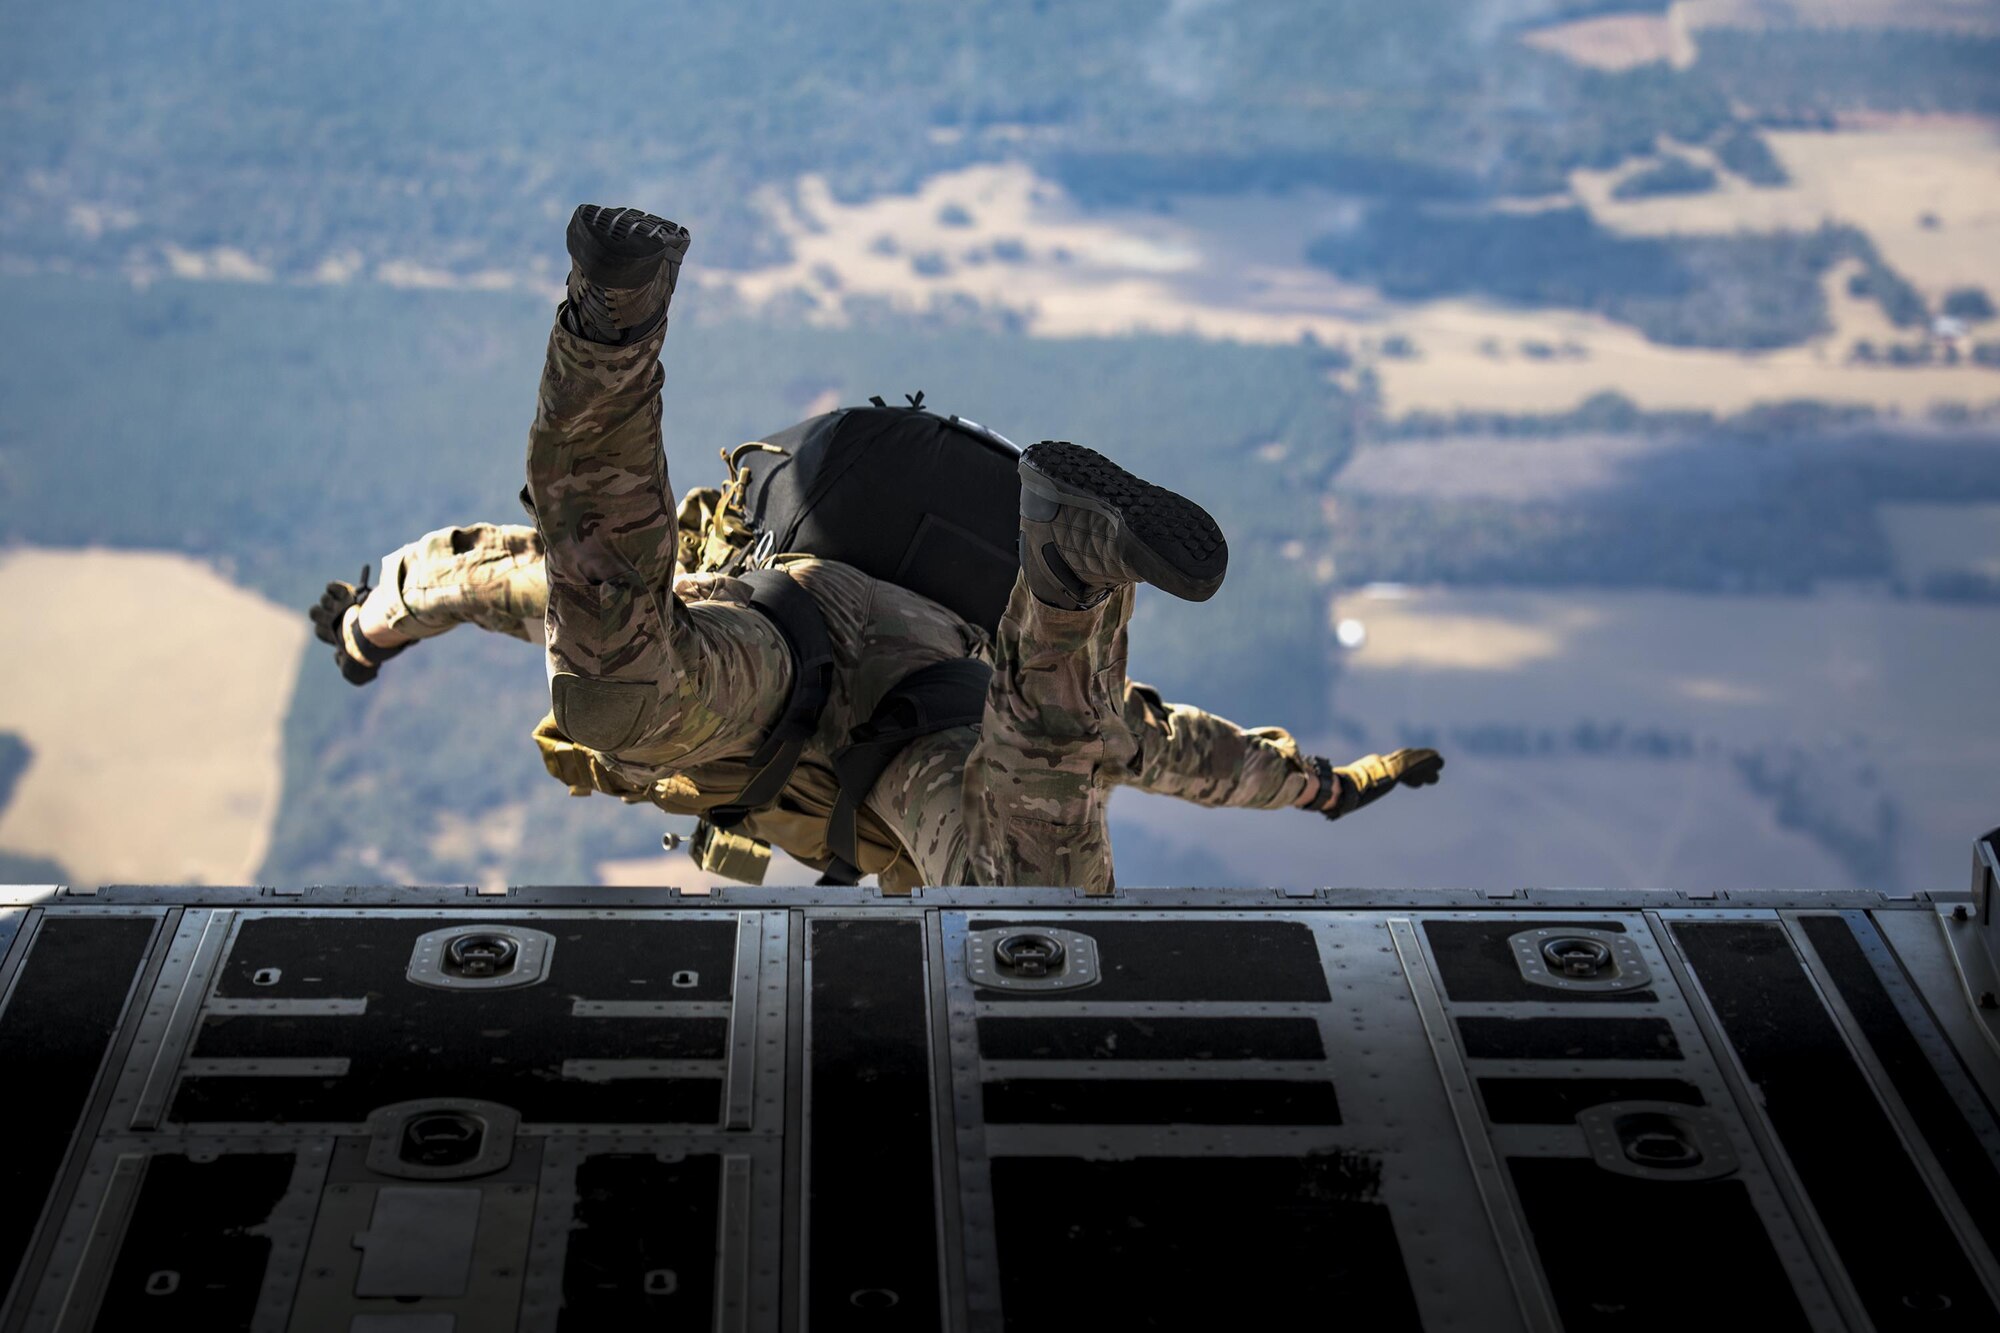 A pararescueman from the 38th Rescue Squadron jumps from an HC-130J Combat King II during a rapid-rescue exercise, Nov. 2, 2016, in the skies over Marianna, Fla. The exercise was designed to test the 347th Rescue Group’s ability to rapidly deploy, plan and execute rescue operations in combat environments. The exercise included HC-130J Combat King IIs, HH-60G Pave Hawks, C-17 Globemaster IIIs, A-10C Thunderbolt IIs, E-8C Joint Stars, pararescuemen and maintenance, intelligence and support personnel. (U.S. Air Force photo by Staff Sgt. Ryan Callaghan)